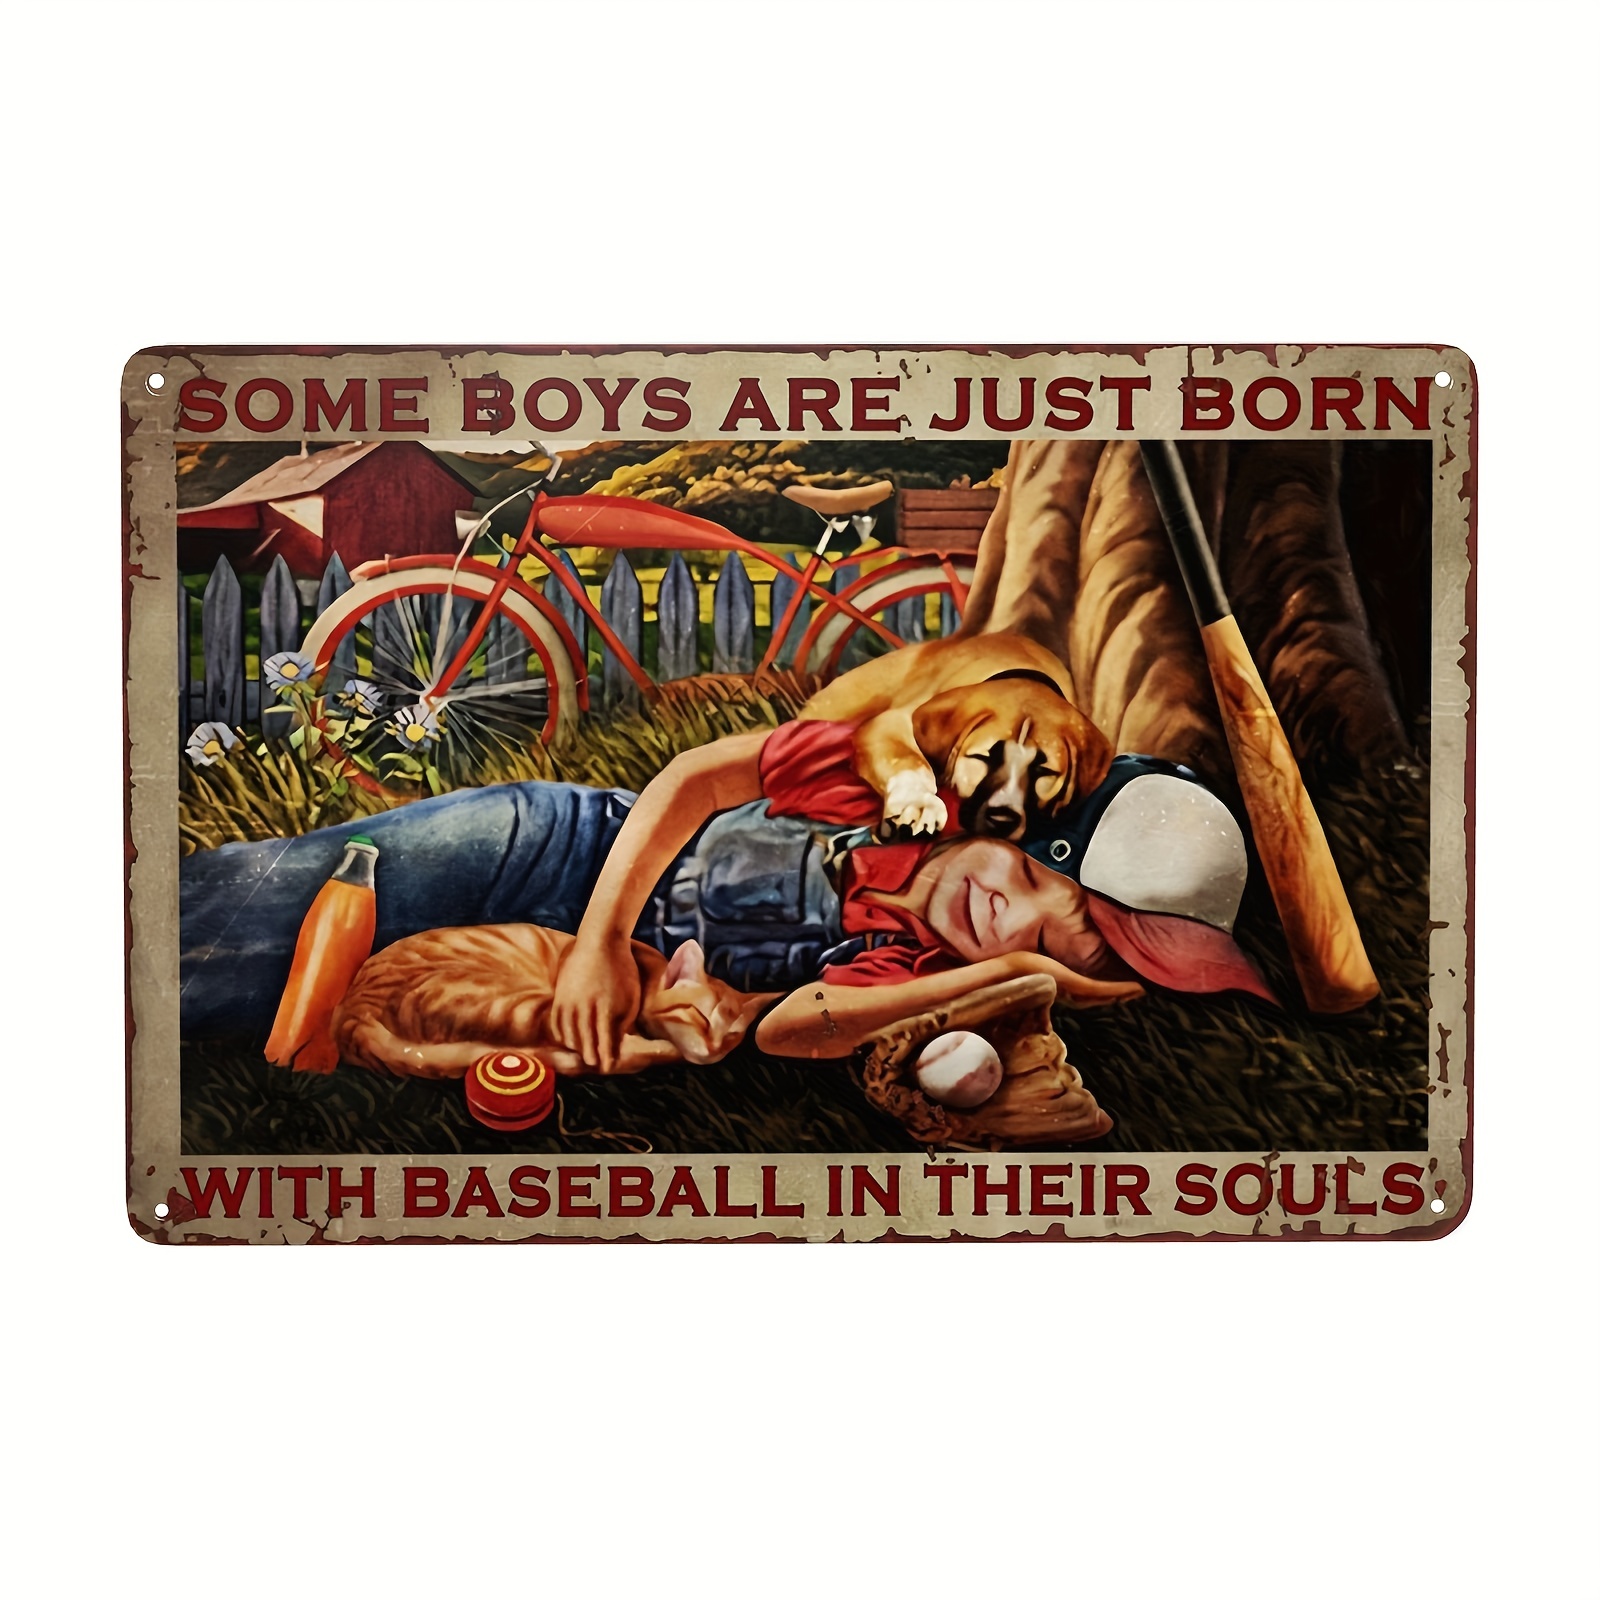 Vintage Baseball Metal Tin Sign, Baseball Pitching Grips, Baseball Life  Lessons, Never Give Up, Retro Baseball Tin Sign Decor For Boys Bedroom,  Wall Art Decor, Personalized Baseball Gifts, Red Decorations For Home